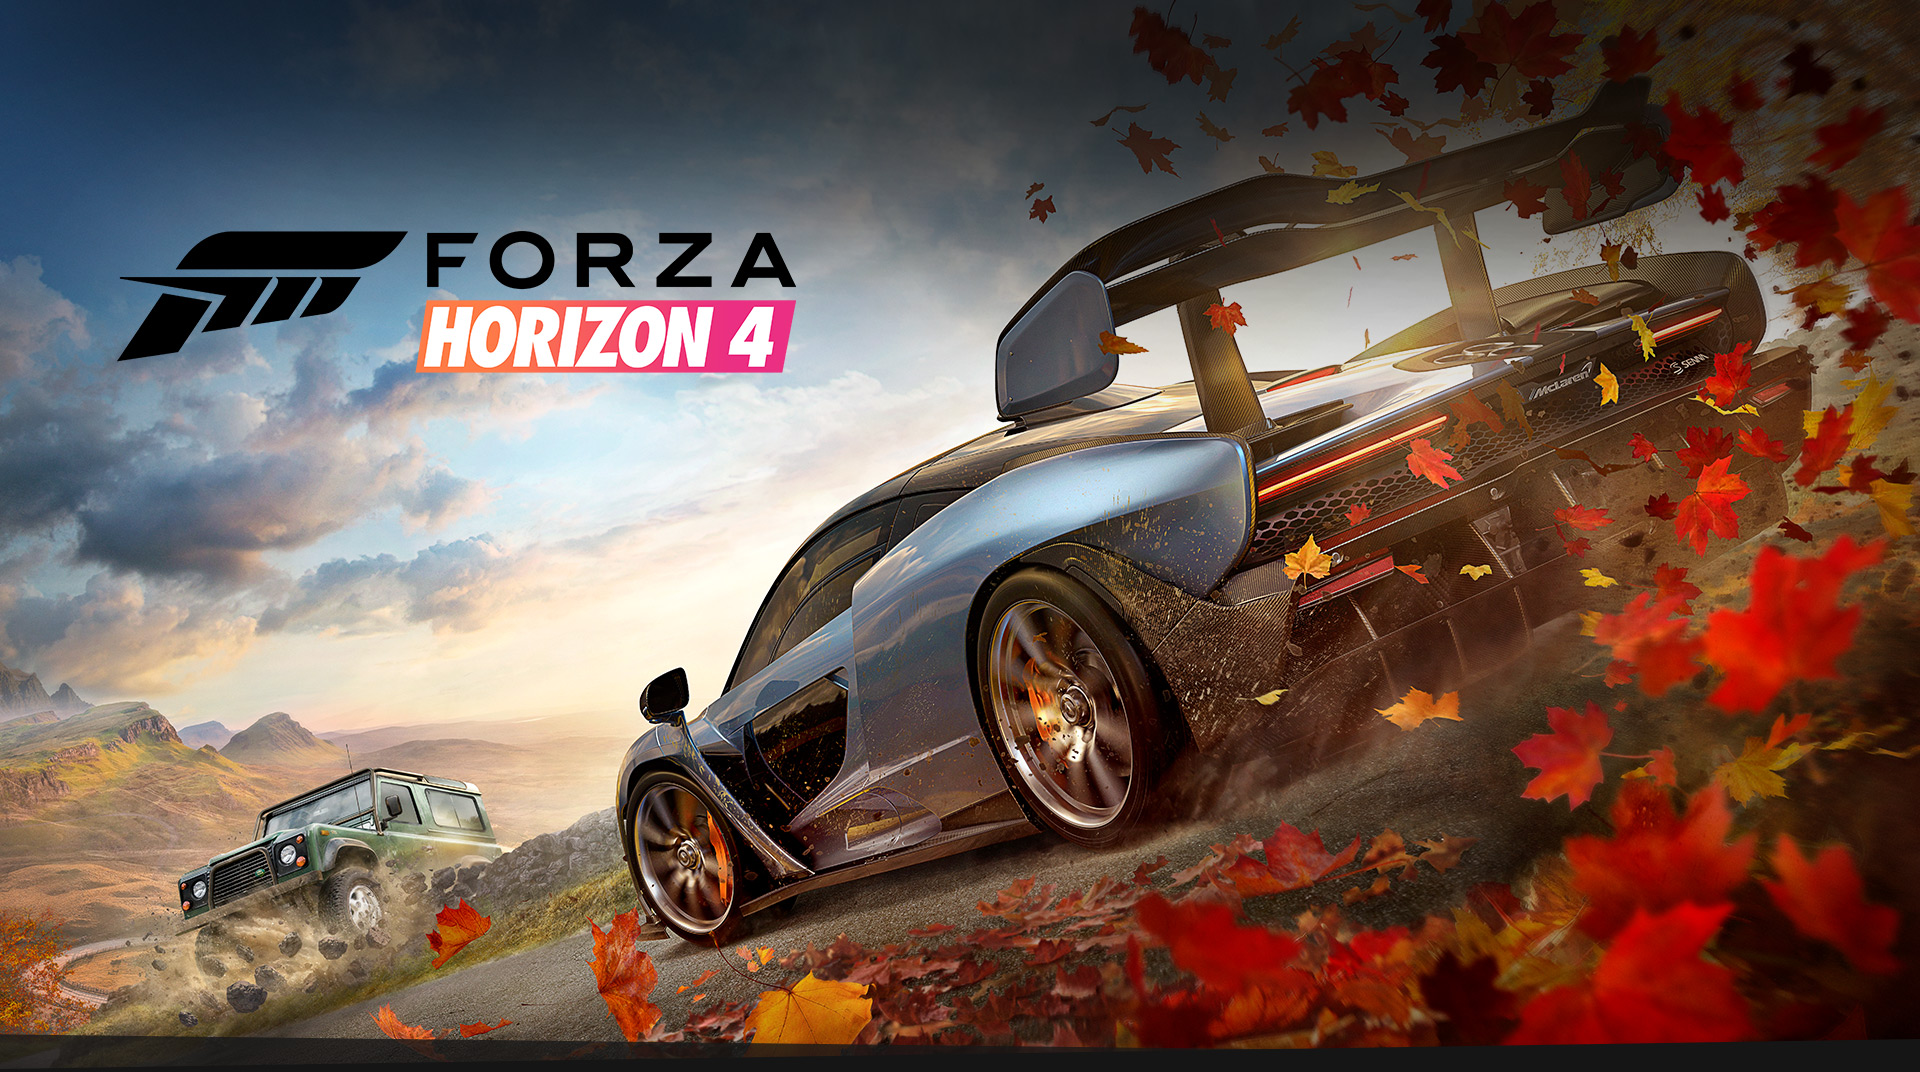 E3 2018: Forza Horizon 4 Will Not Feature Playable Motorcycles